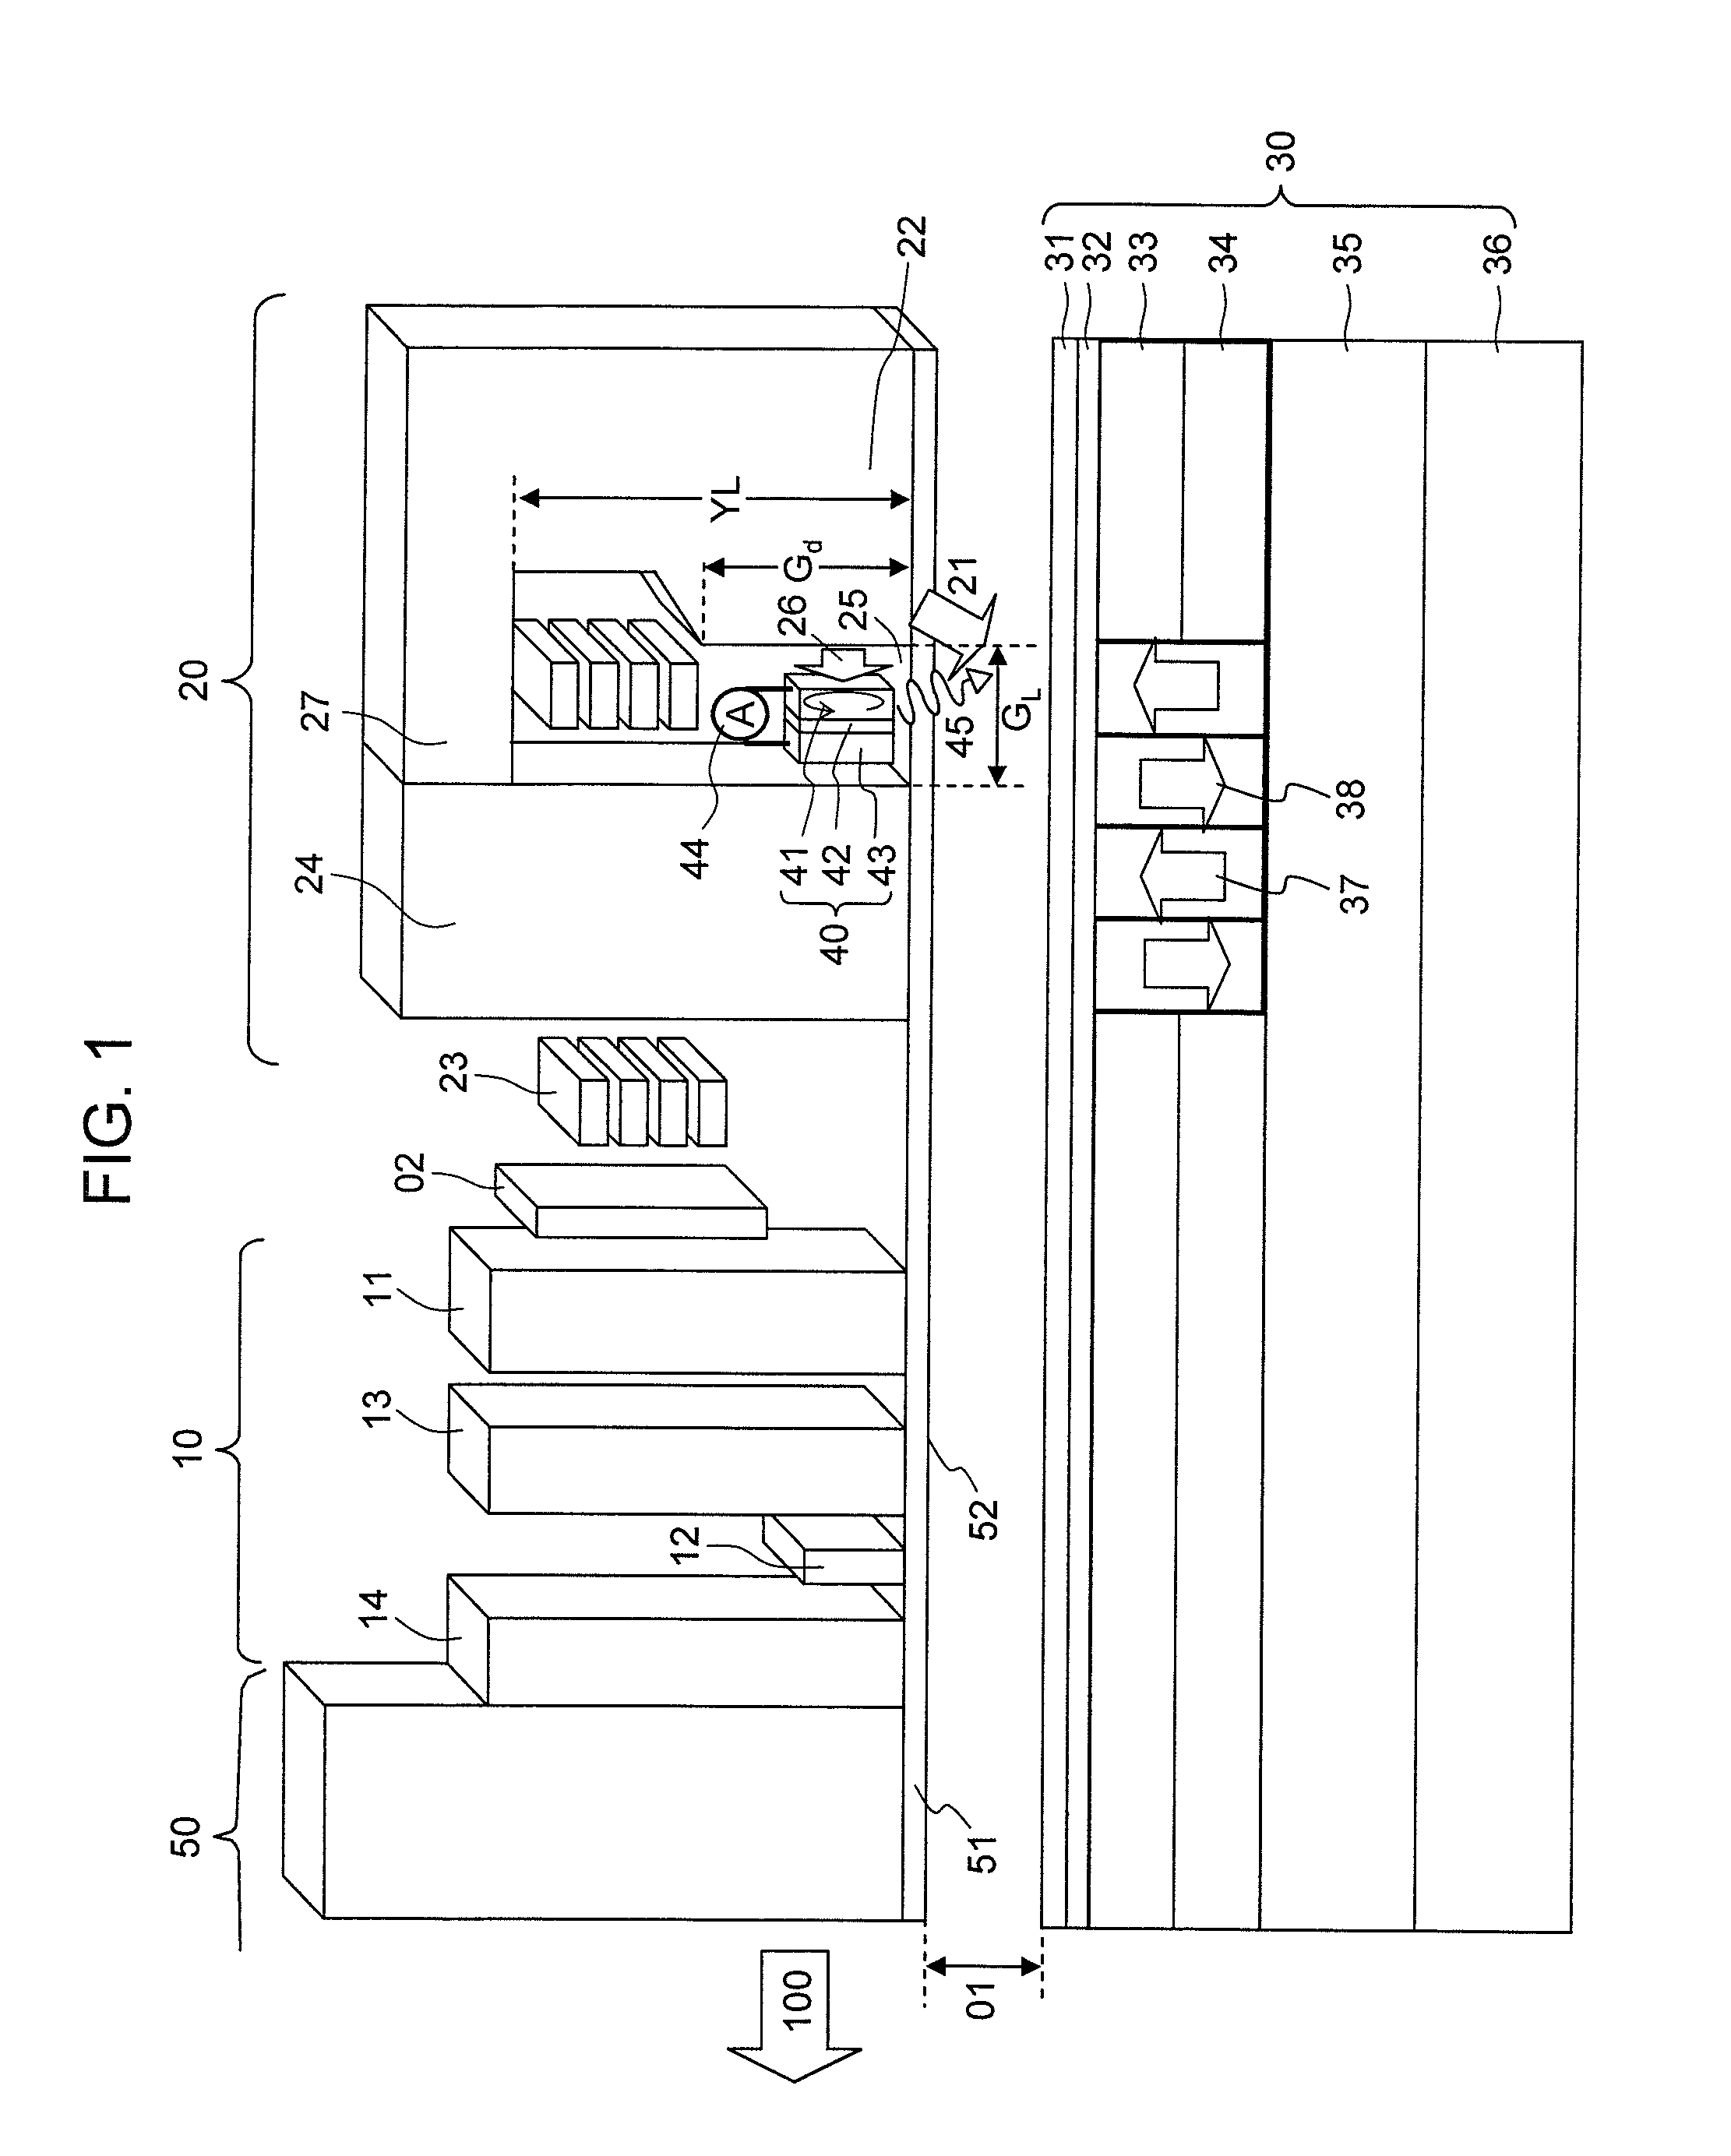 Magnetic head, magnetic recording method and apparatus for controlling magnetic head with spin torque oscillator in a disk drive